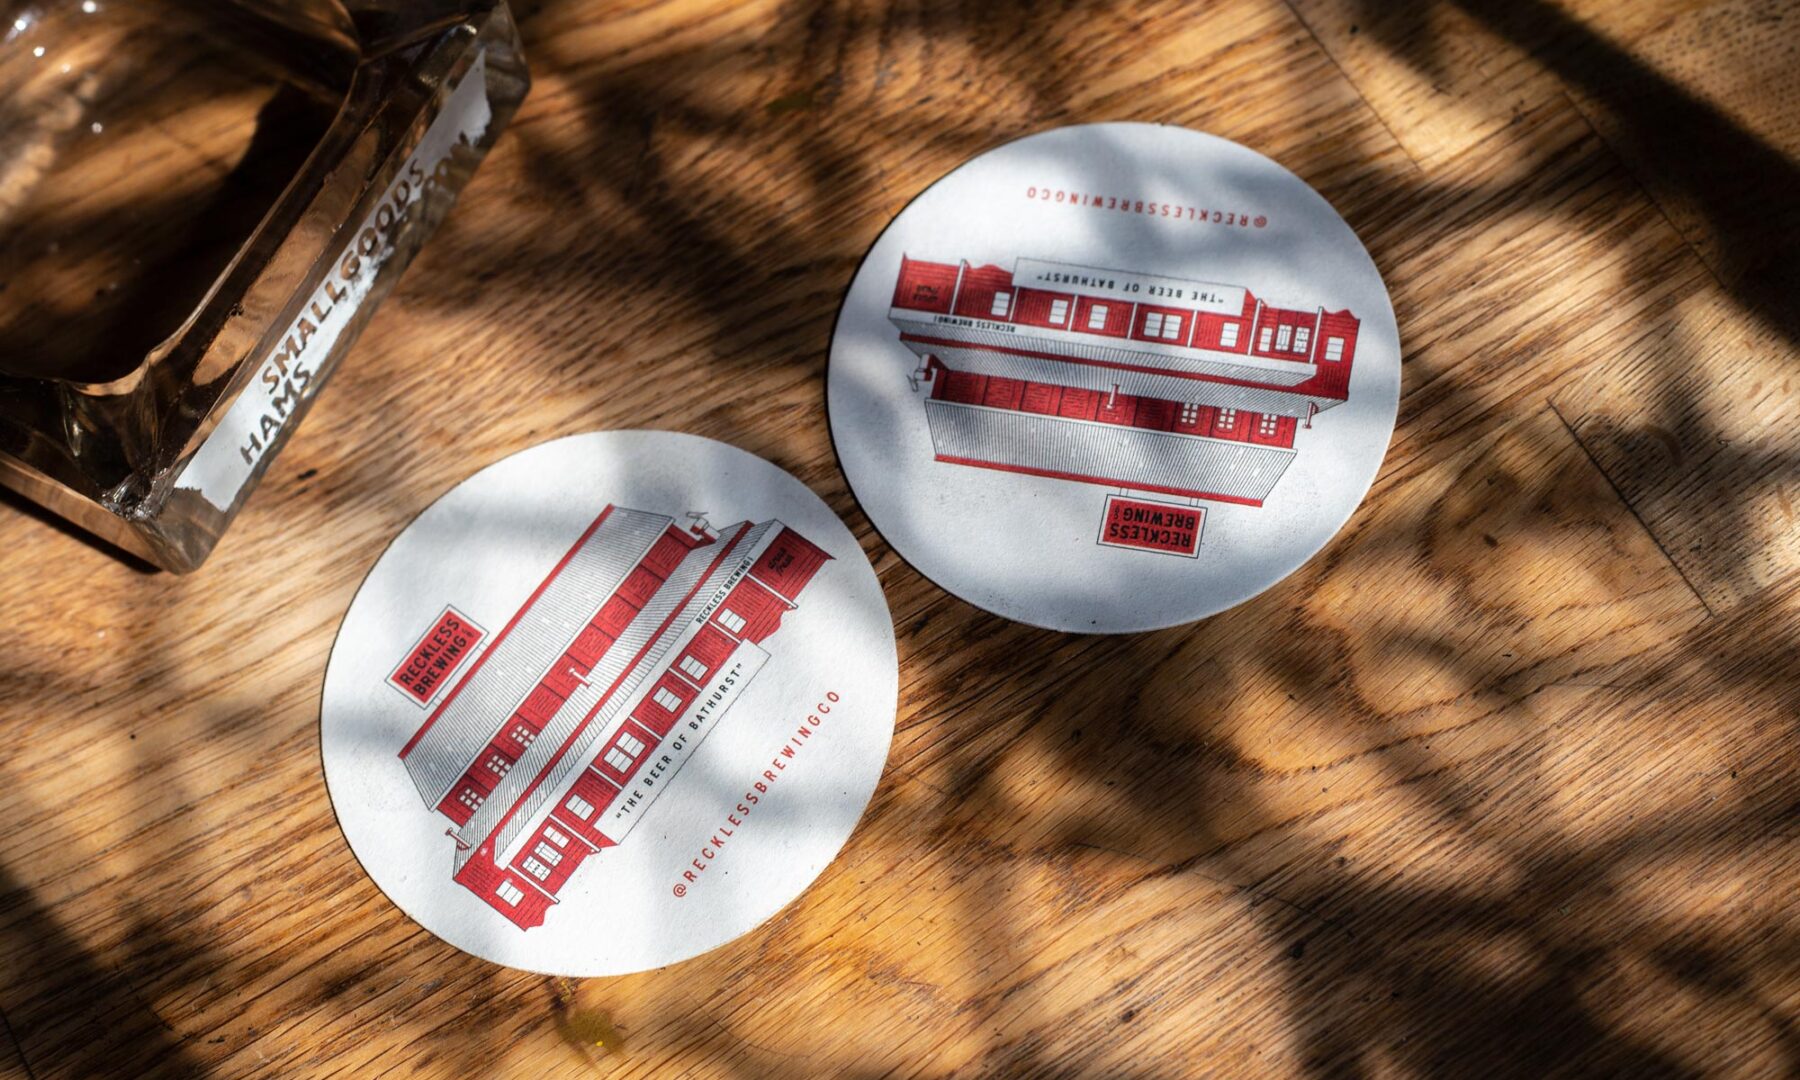 Reckless Brewing coasters on dappled background